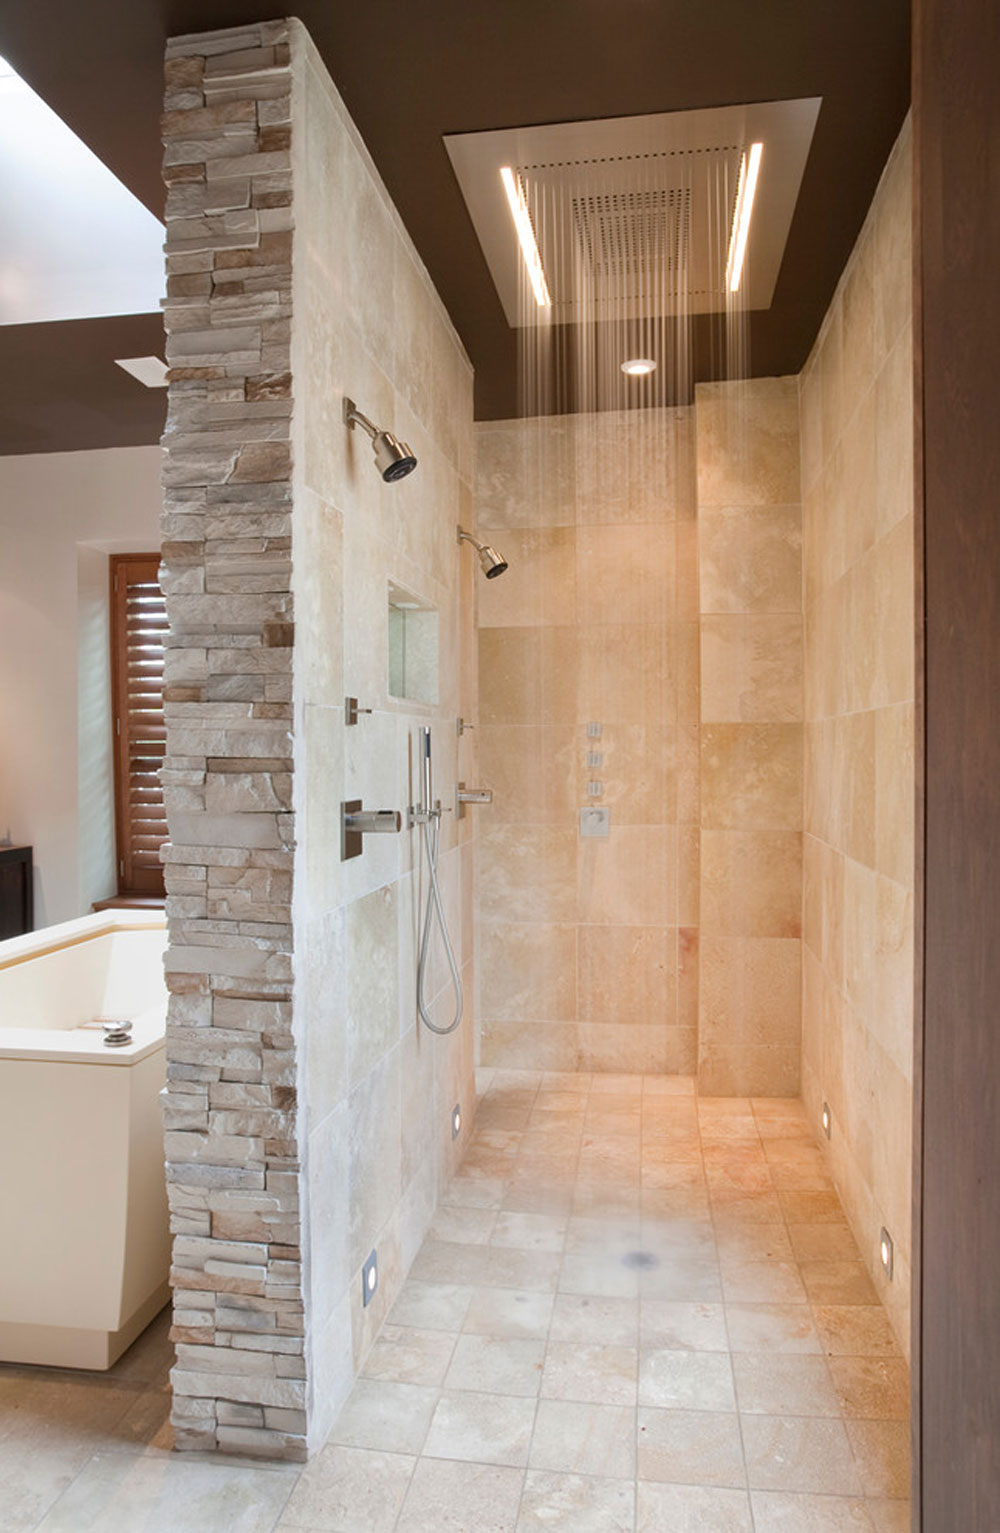 19th-St-by-ART-Design-Build Shower niche ideas and best practices for your bathroom